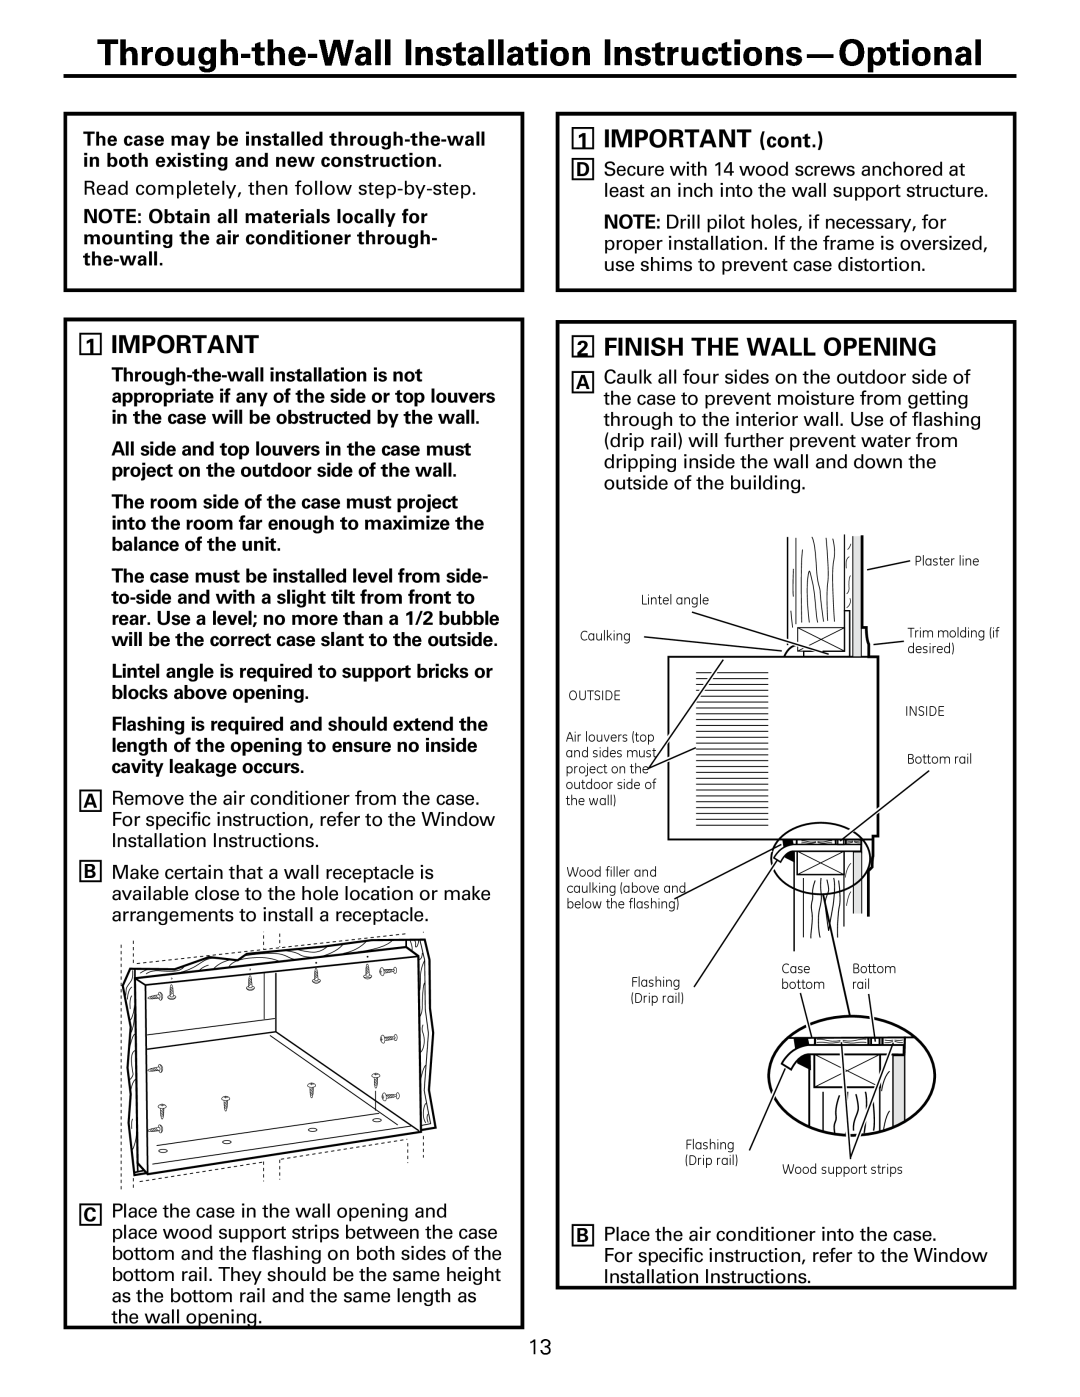 GE AEM2, AEQ2 installation instructions IMPORTANT cont, 1IMPORTANT, 2FINISH THE WALL OPENING 